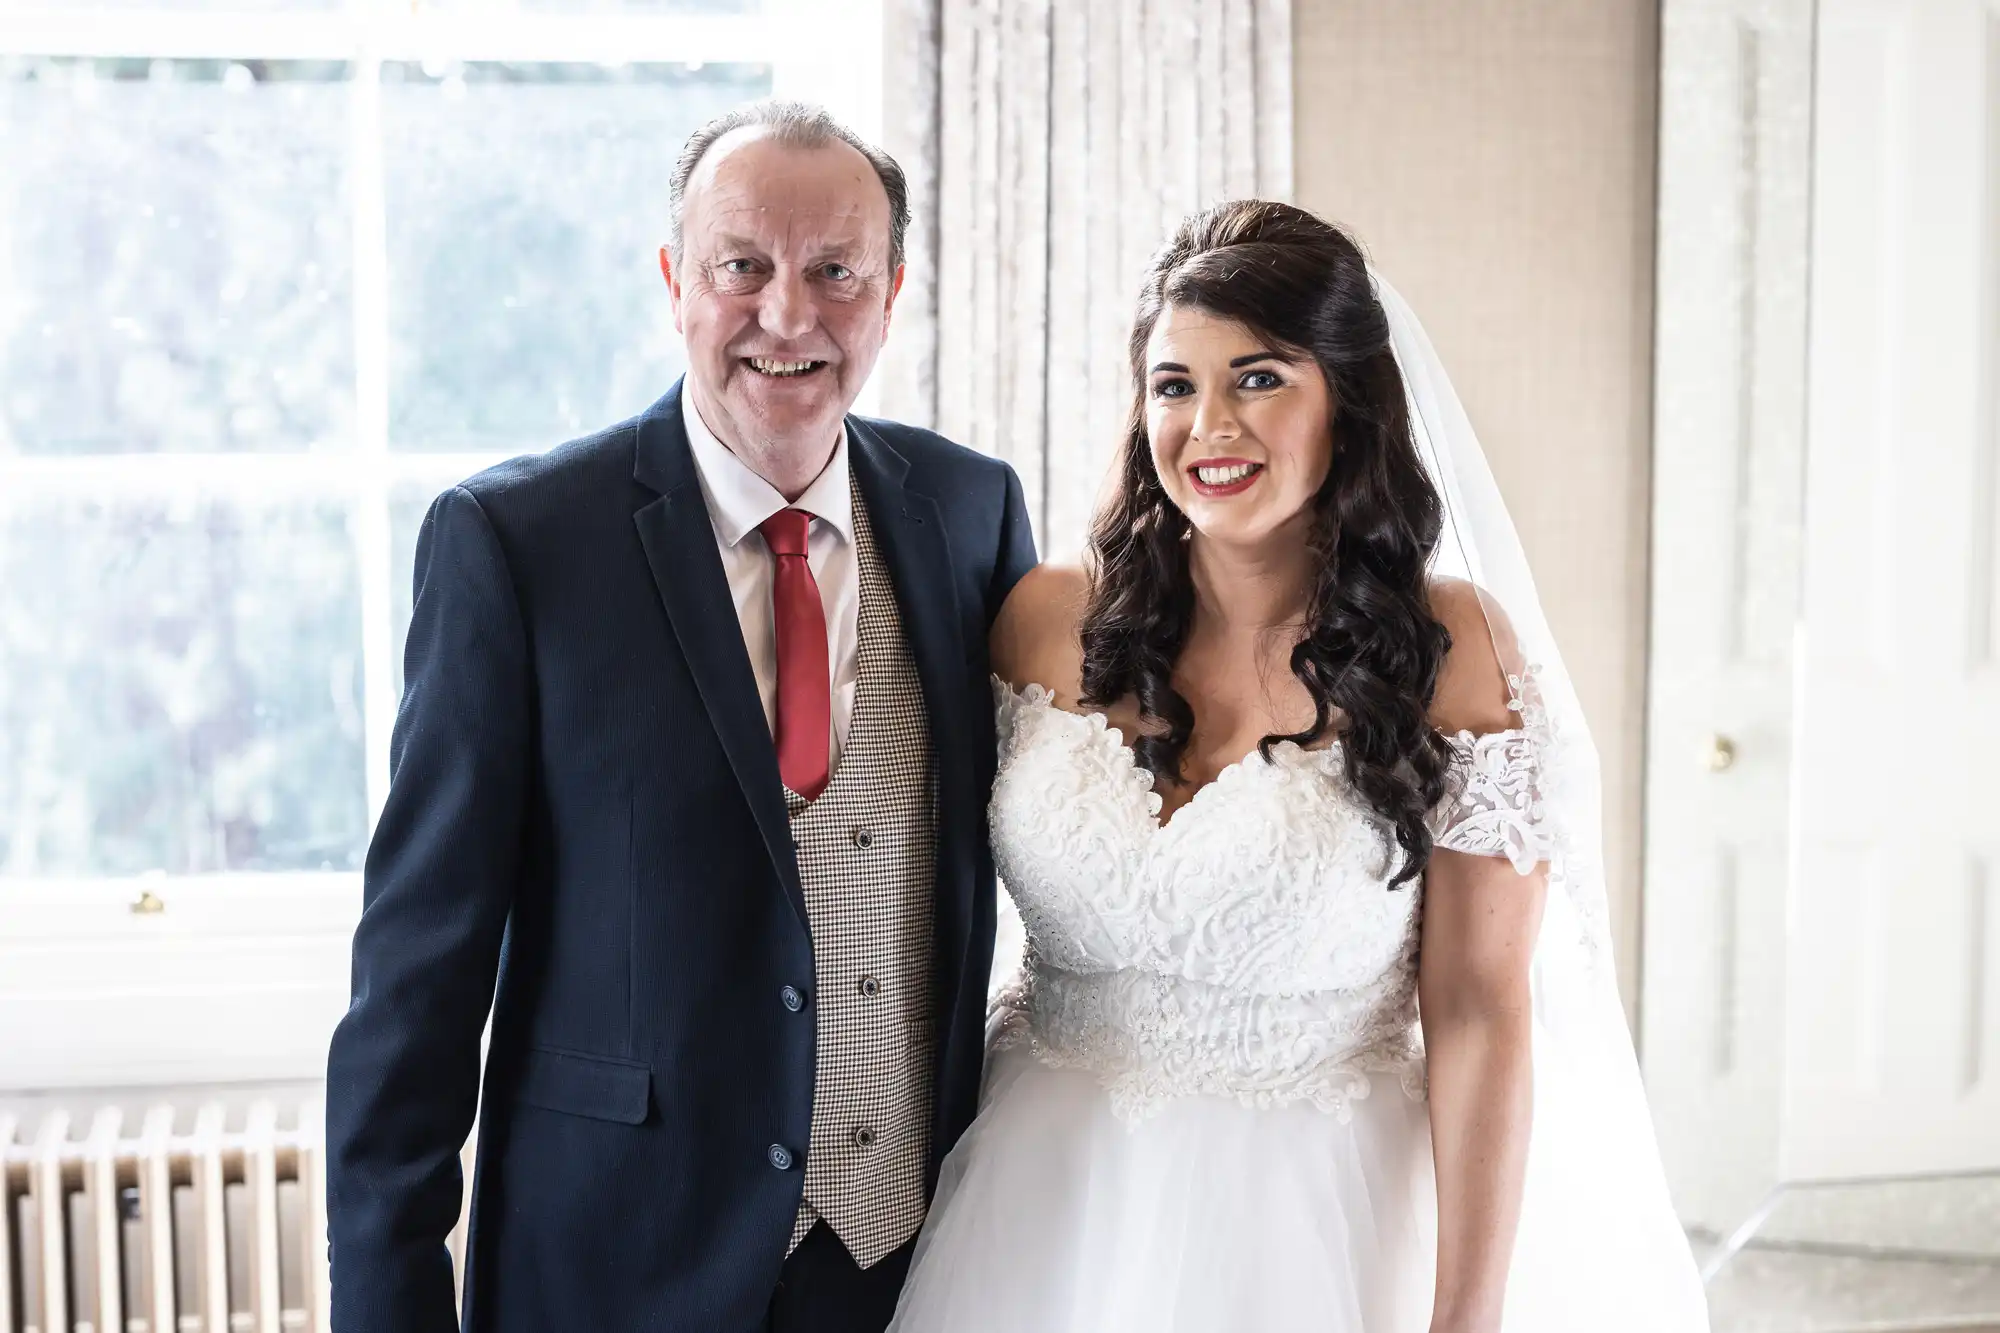 A man in a suit and tie stands beside a woman in a white wedding dress, both smiling, in a brightly lit room with a window in the background.